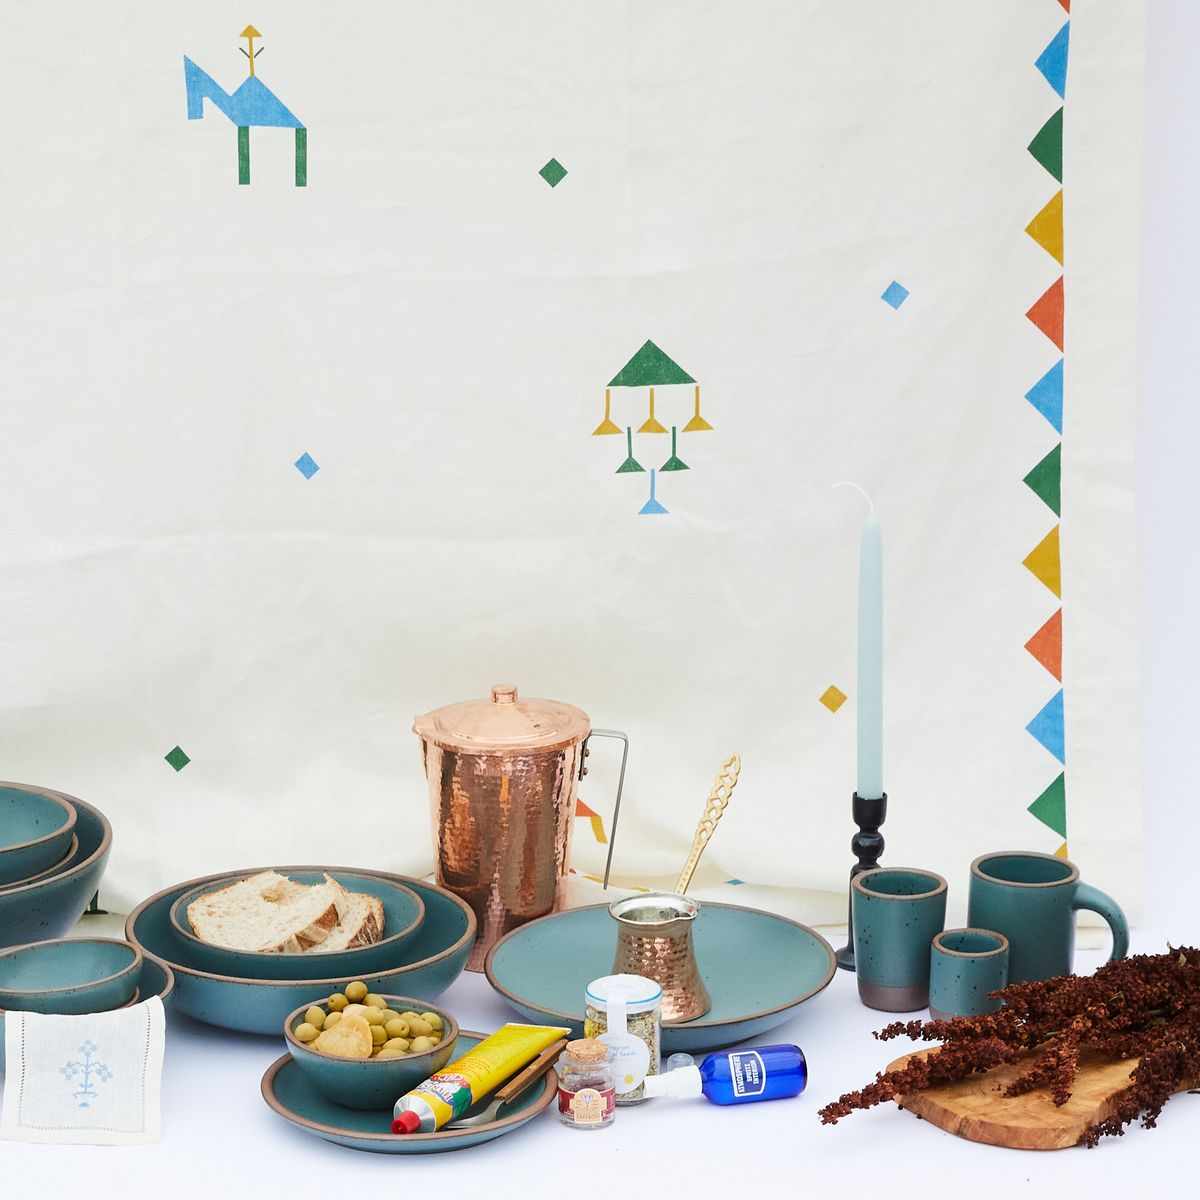 White tablecloth with festival images hanging behind a feast